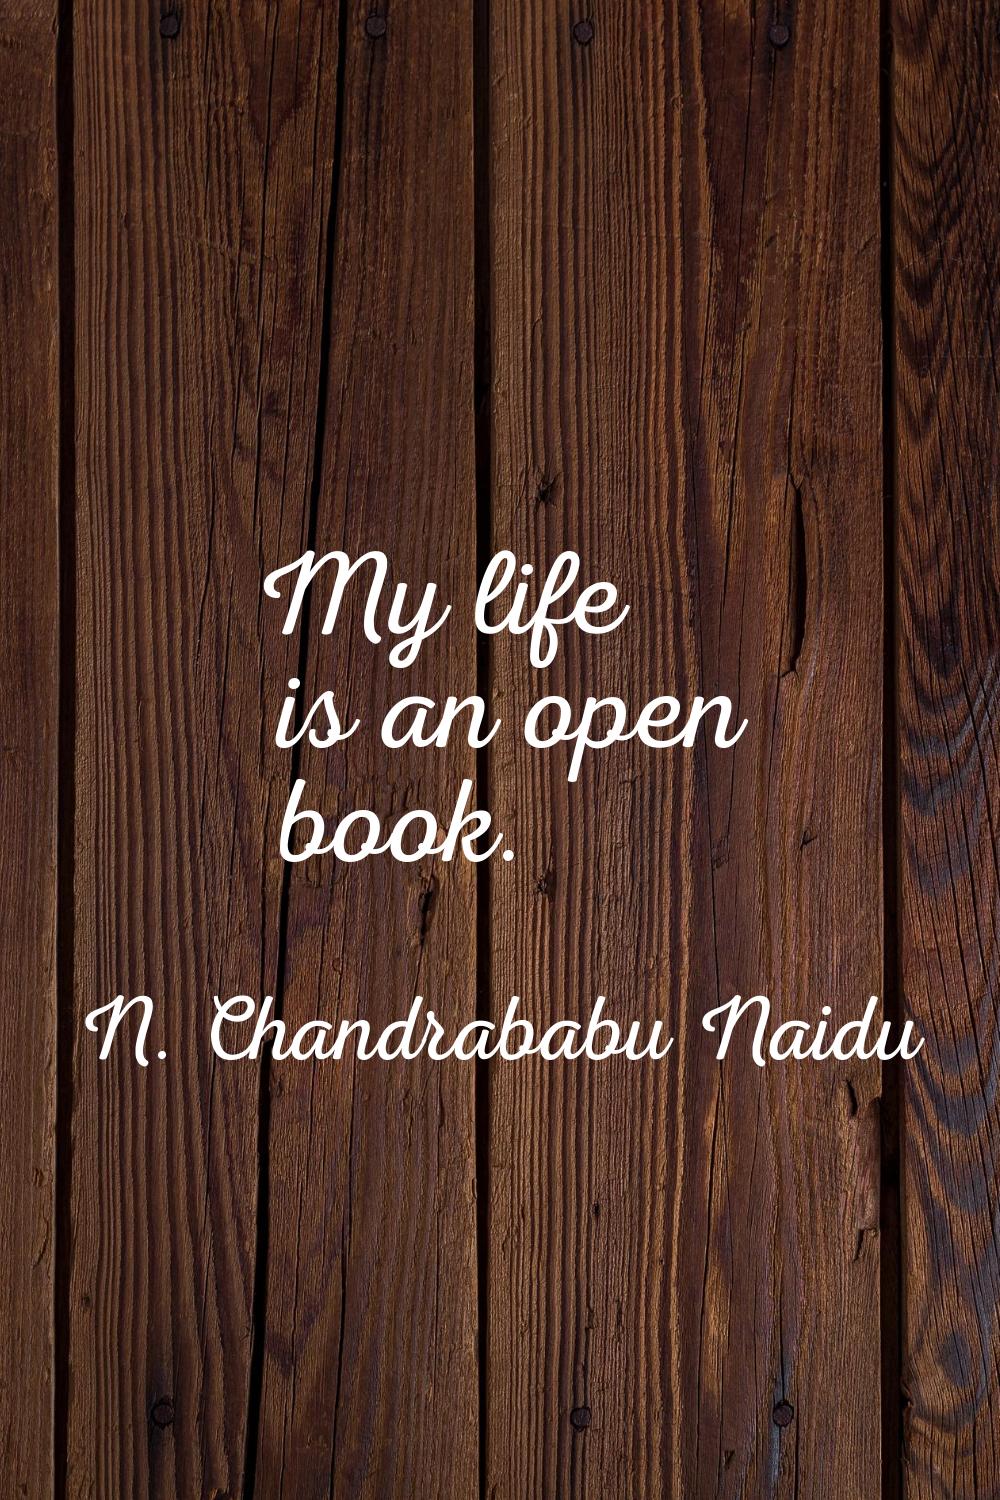 My life is an open book.